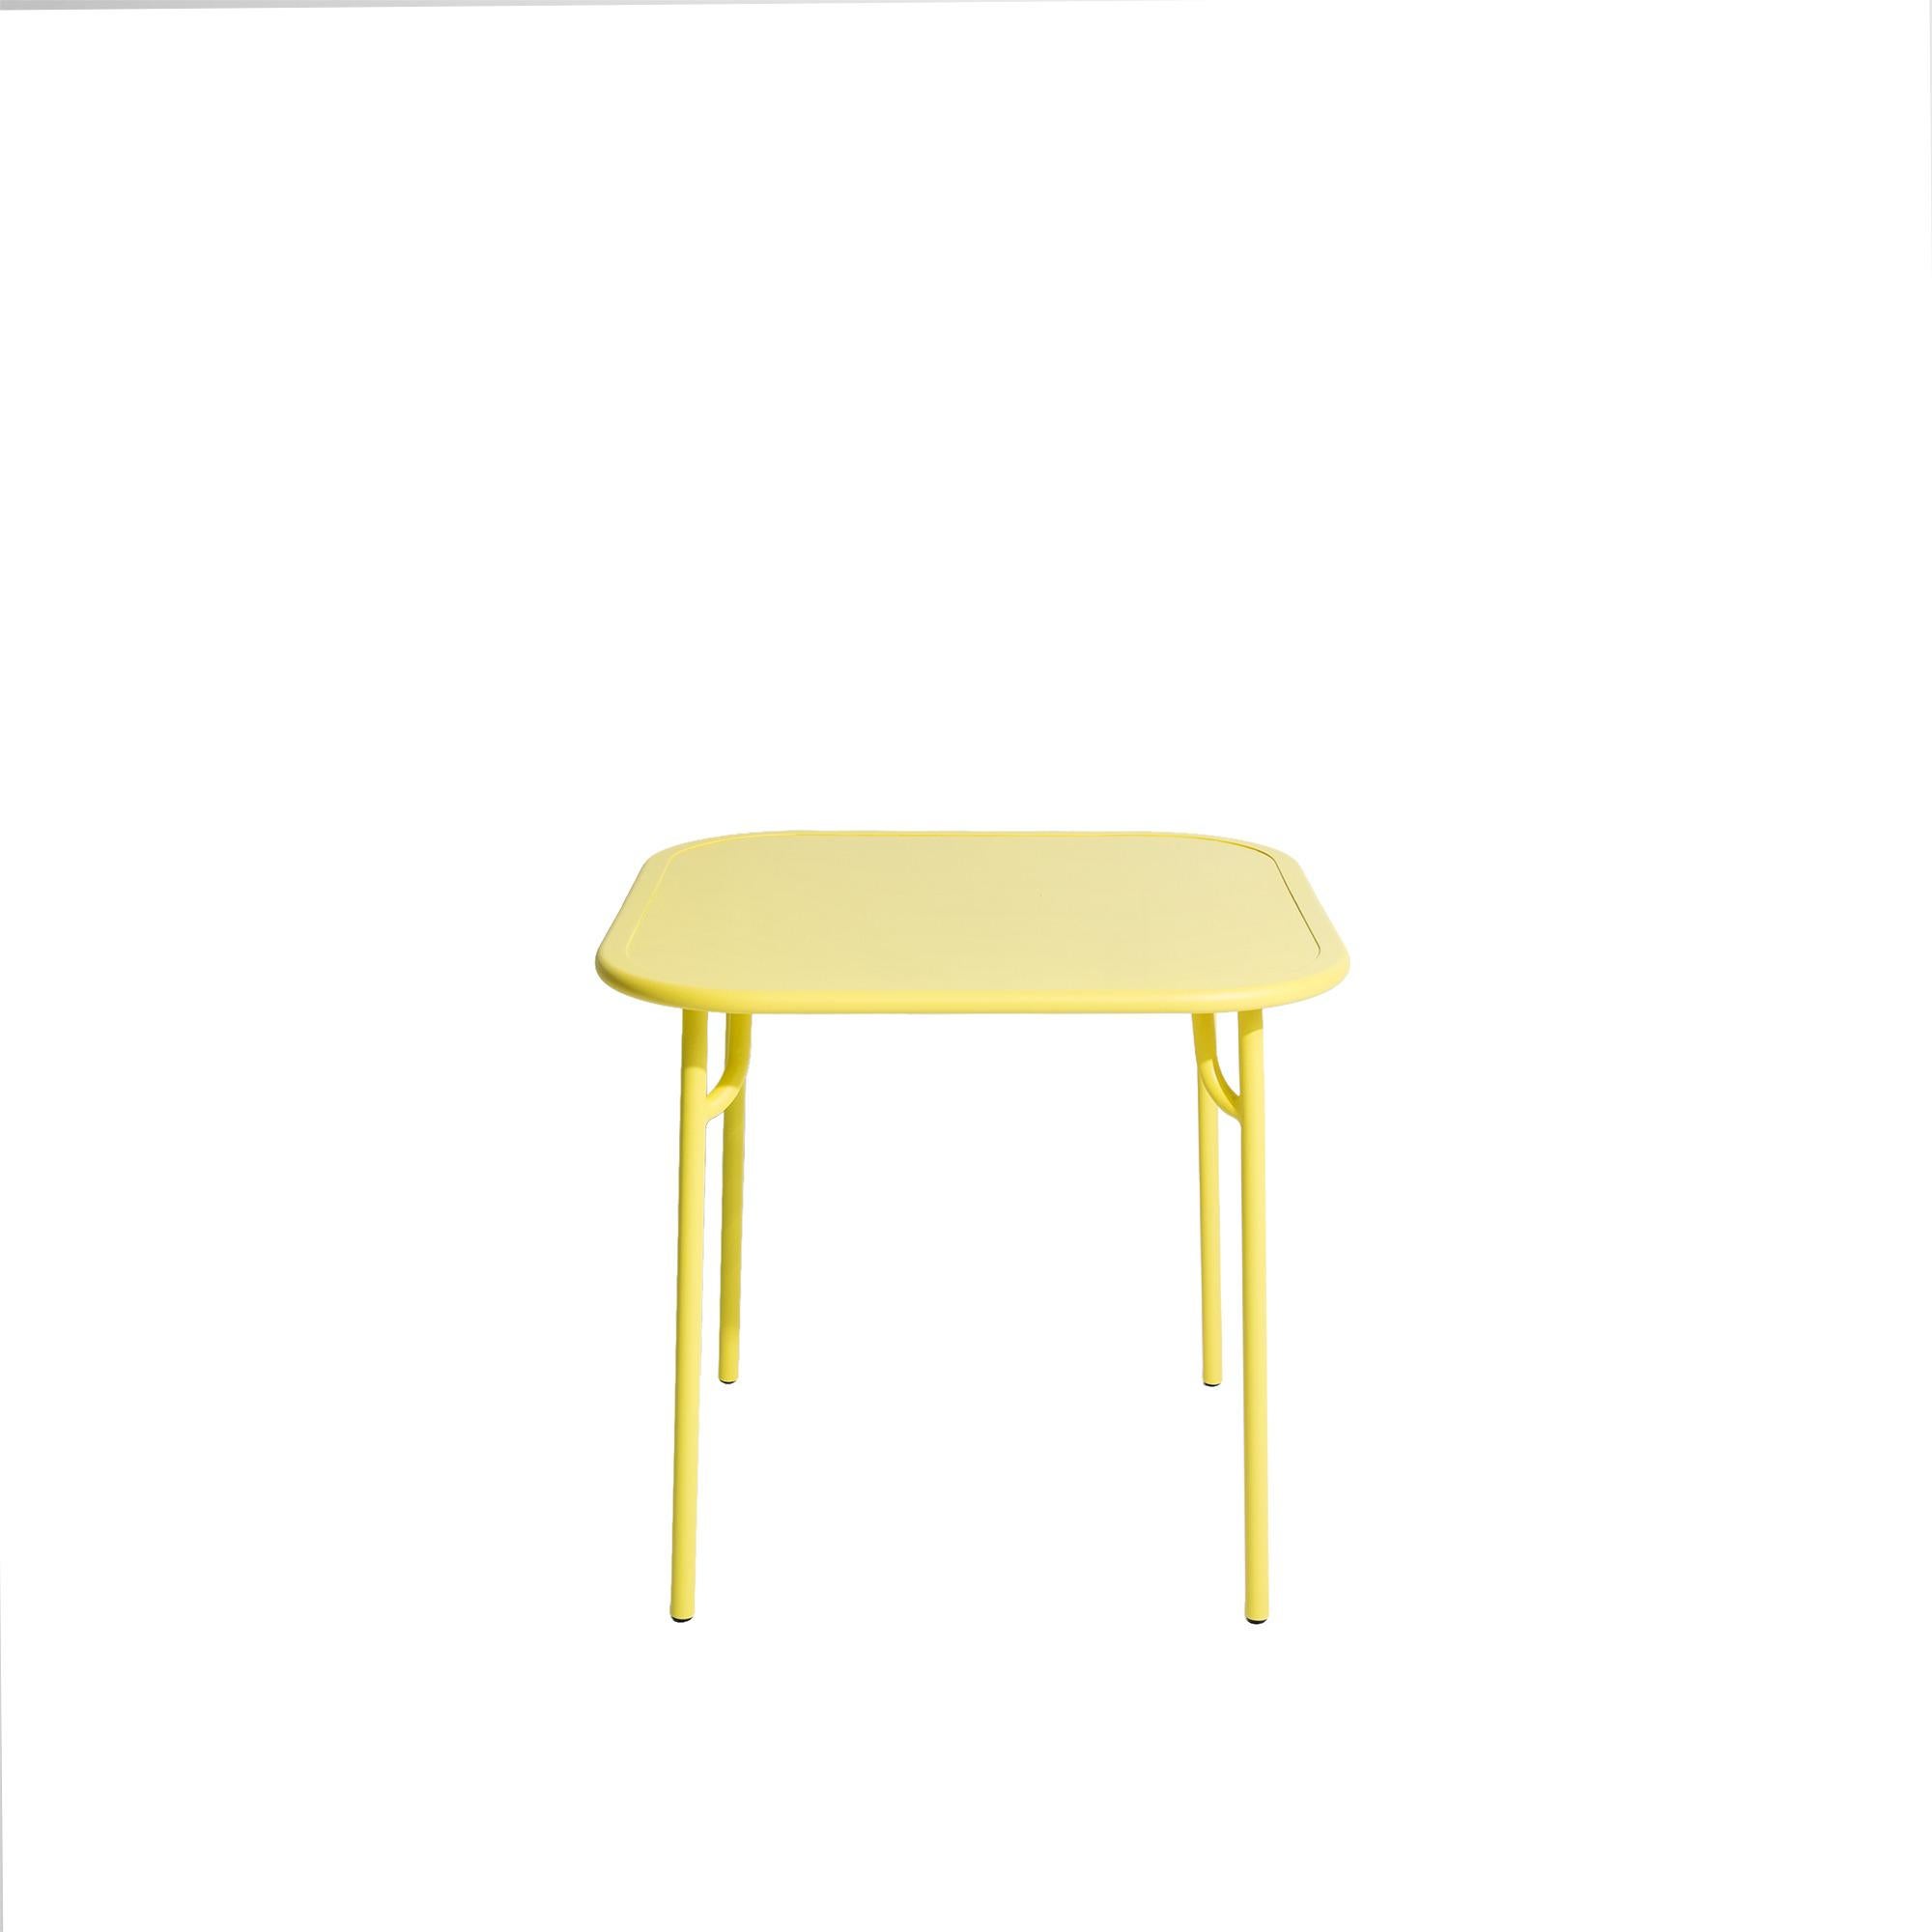 Petite Friture Week-End Plain Square Dining Table in Yellow Aluminium by Studio BrichetZiegler, 2017

The week-end collection is a full range of outdoor furniture, in aluminium grained epoxy paint, matt finish, that includes 18 functions and 8